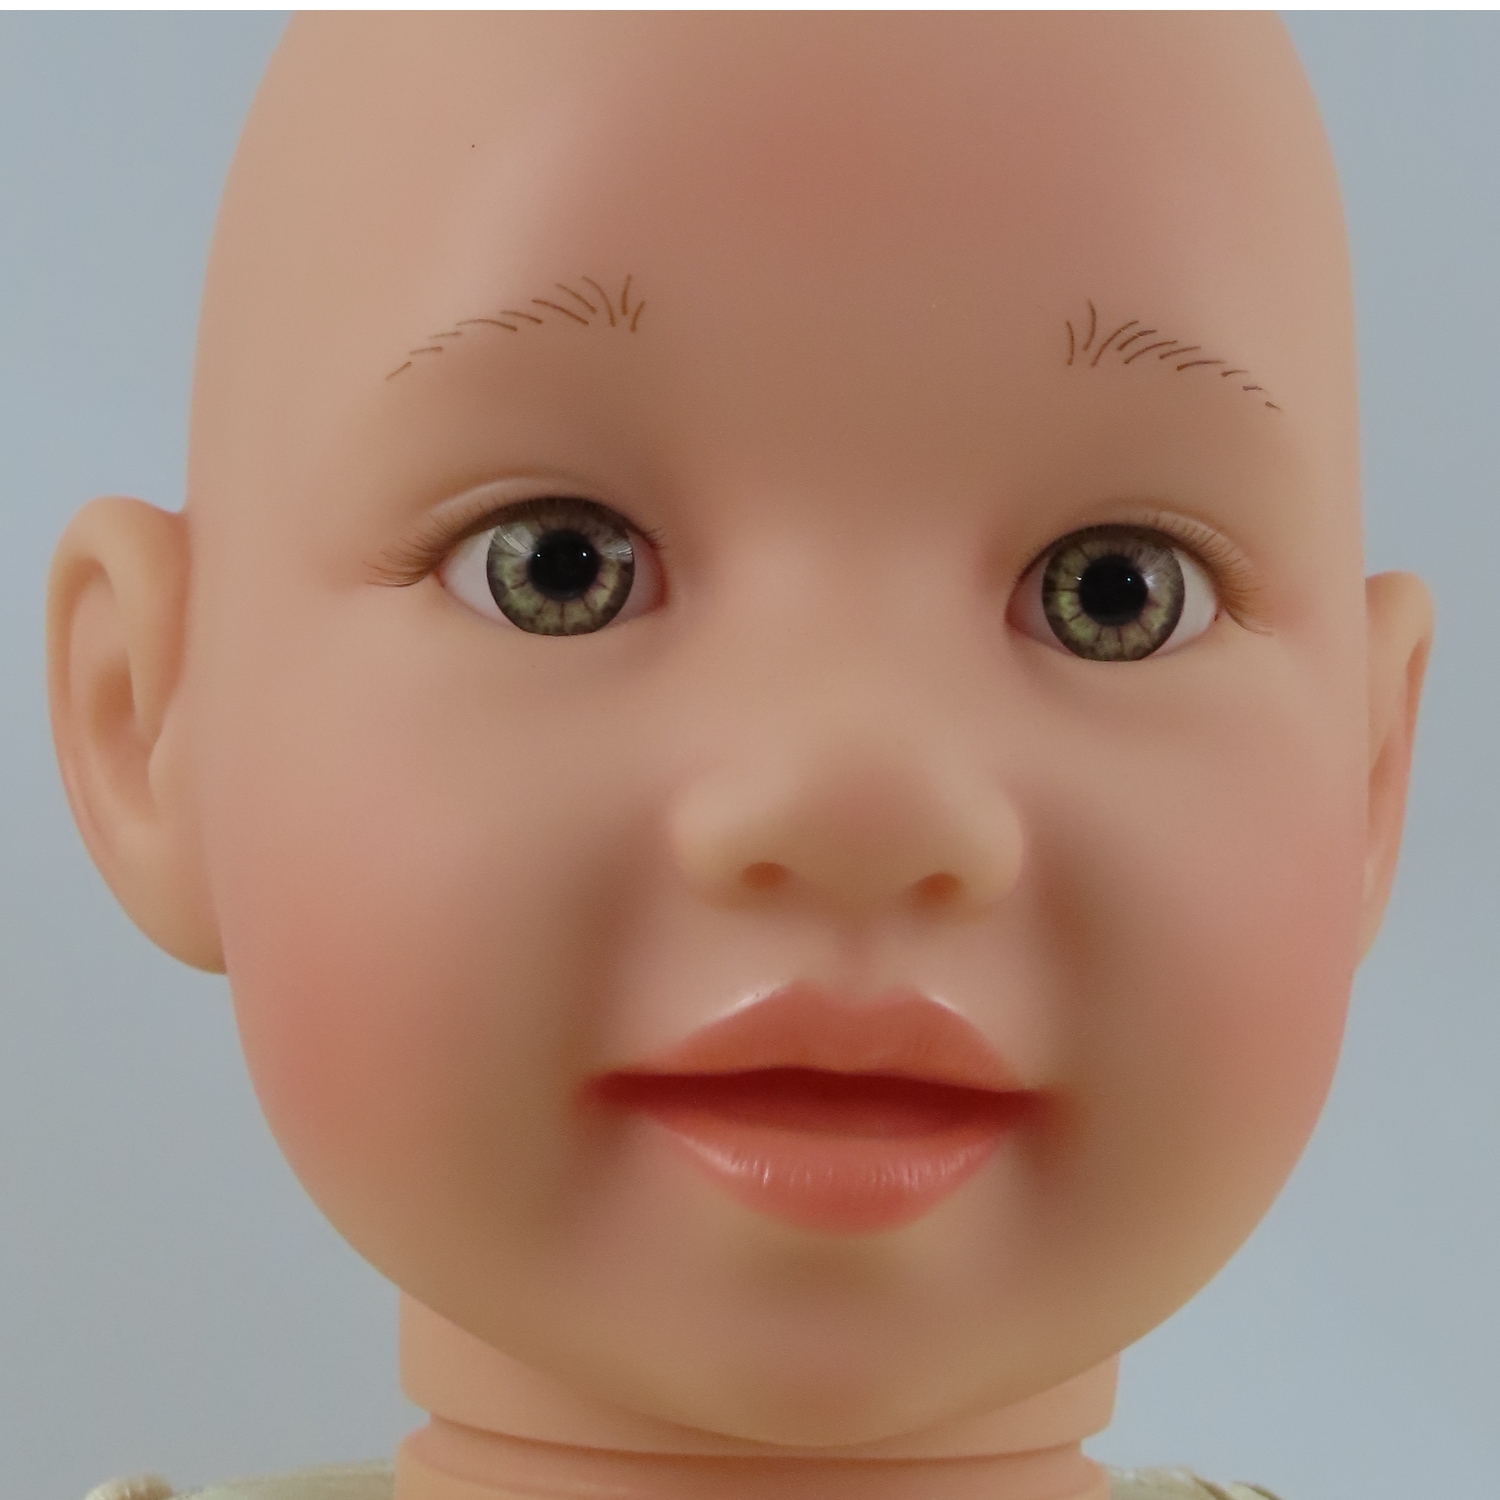 Jilly Bean Doll Kit for Creating Toddler and Baby Dolls That Look Real